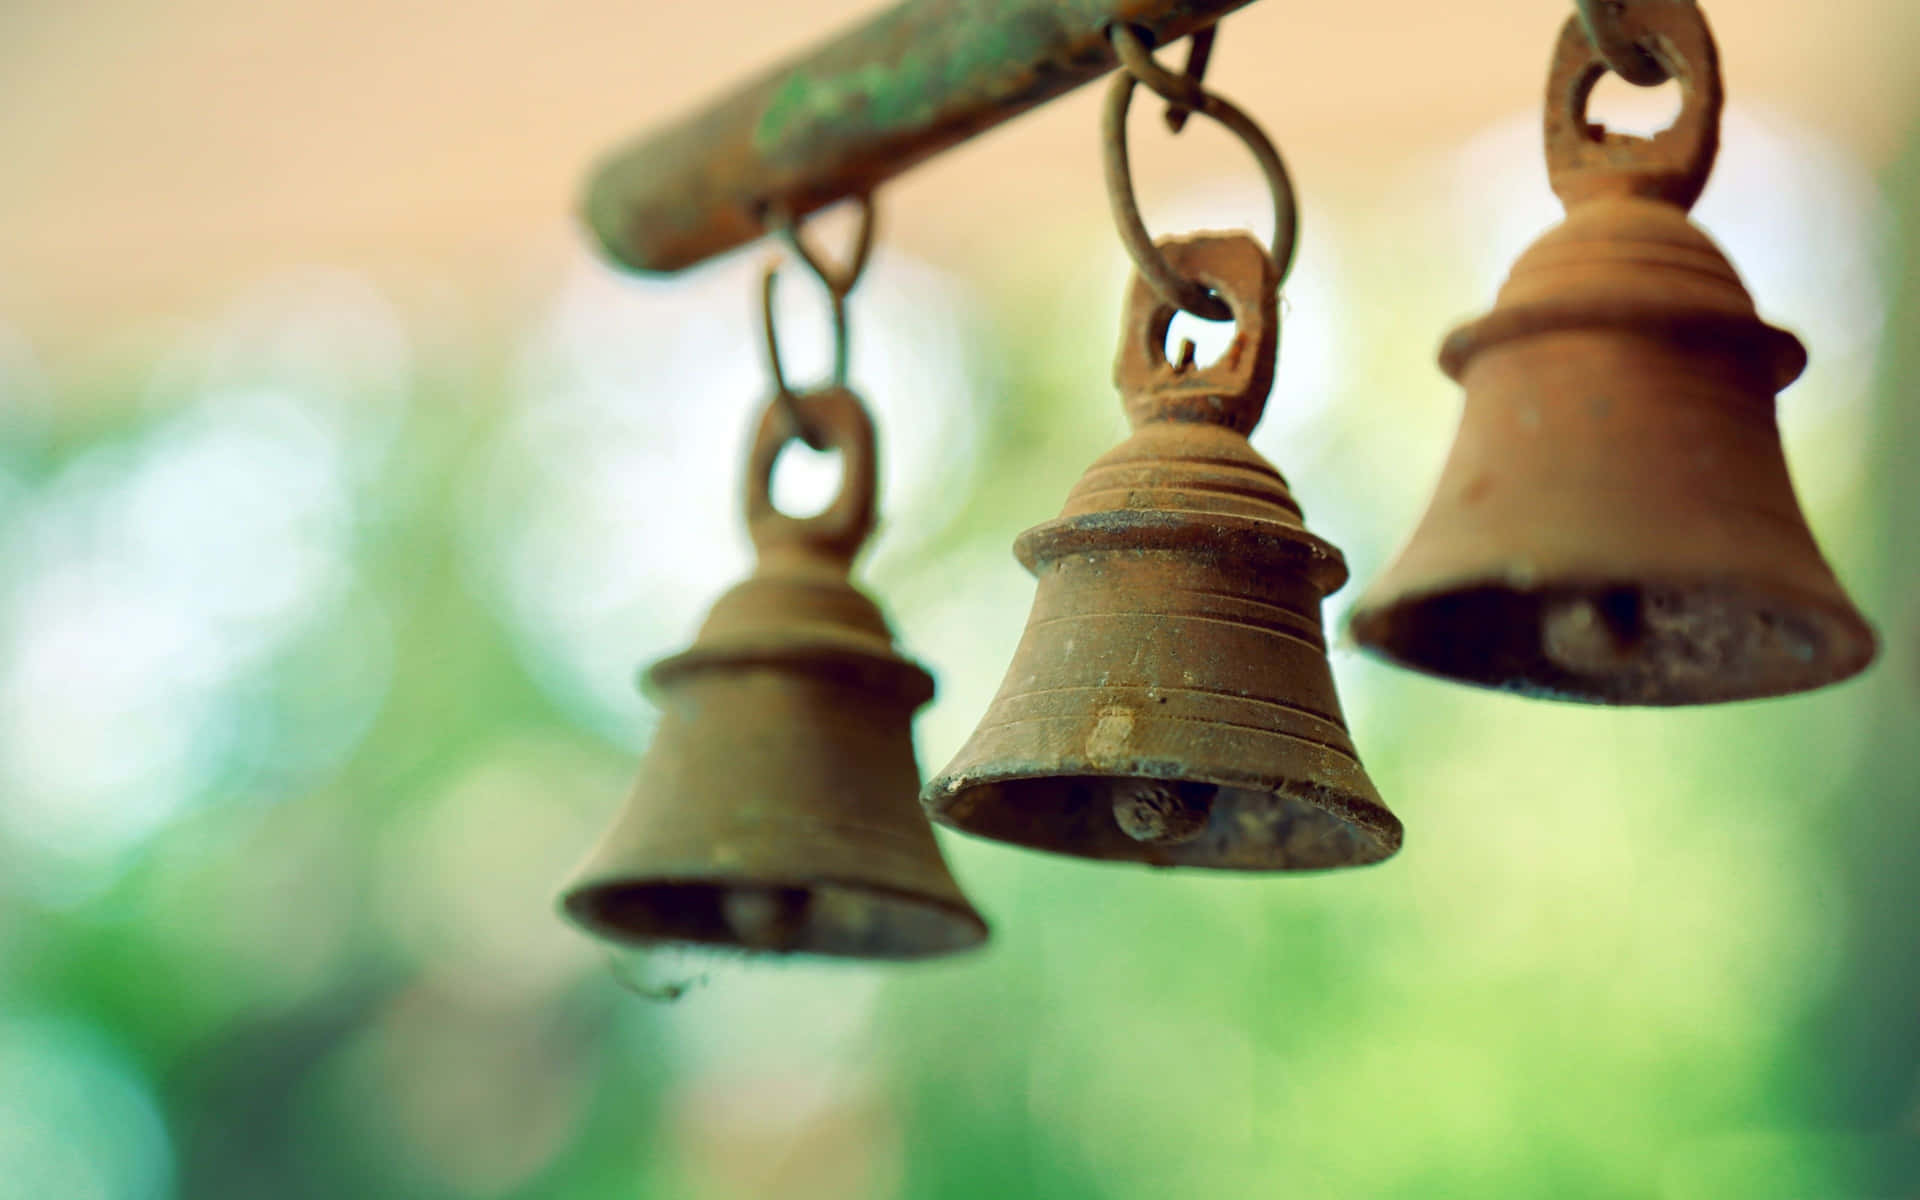 bells hanging from a chain